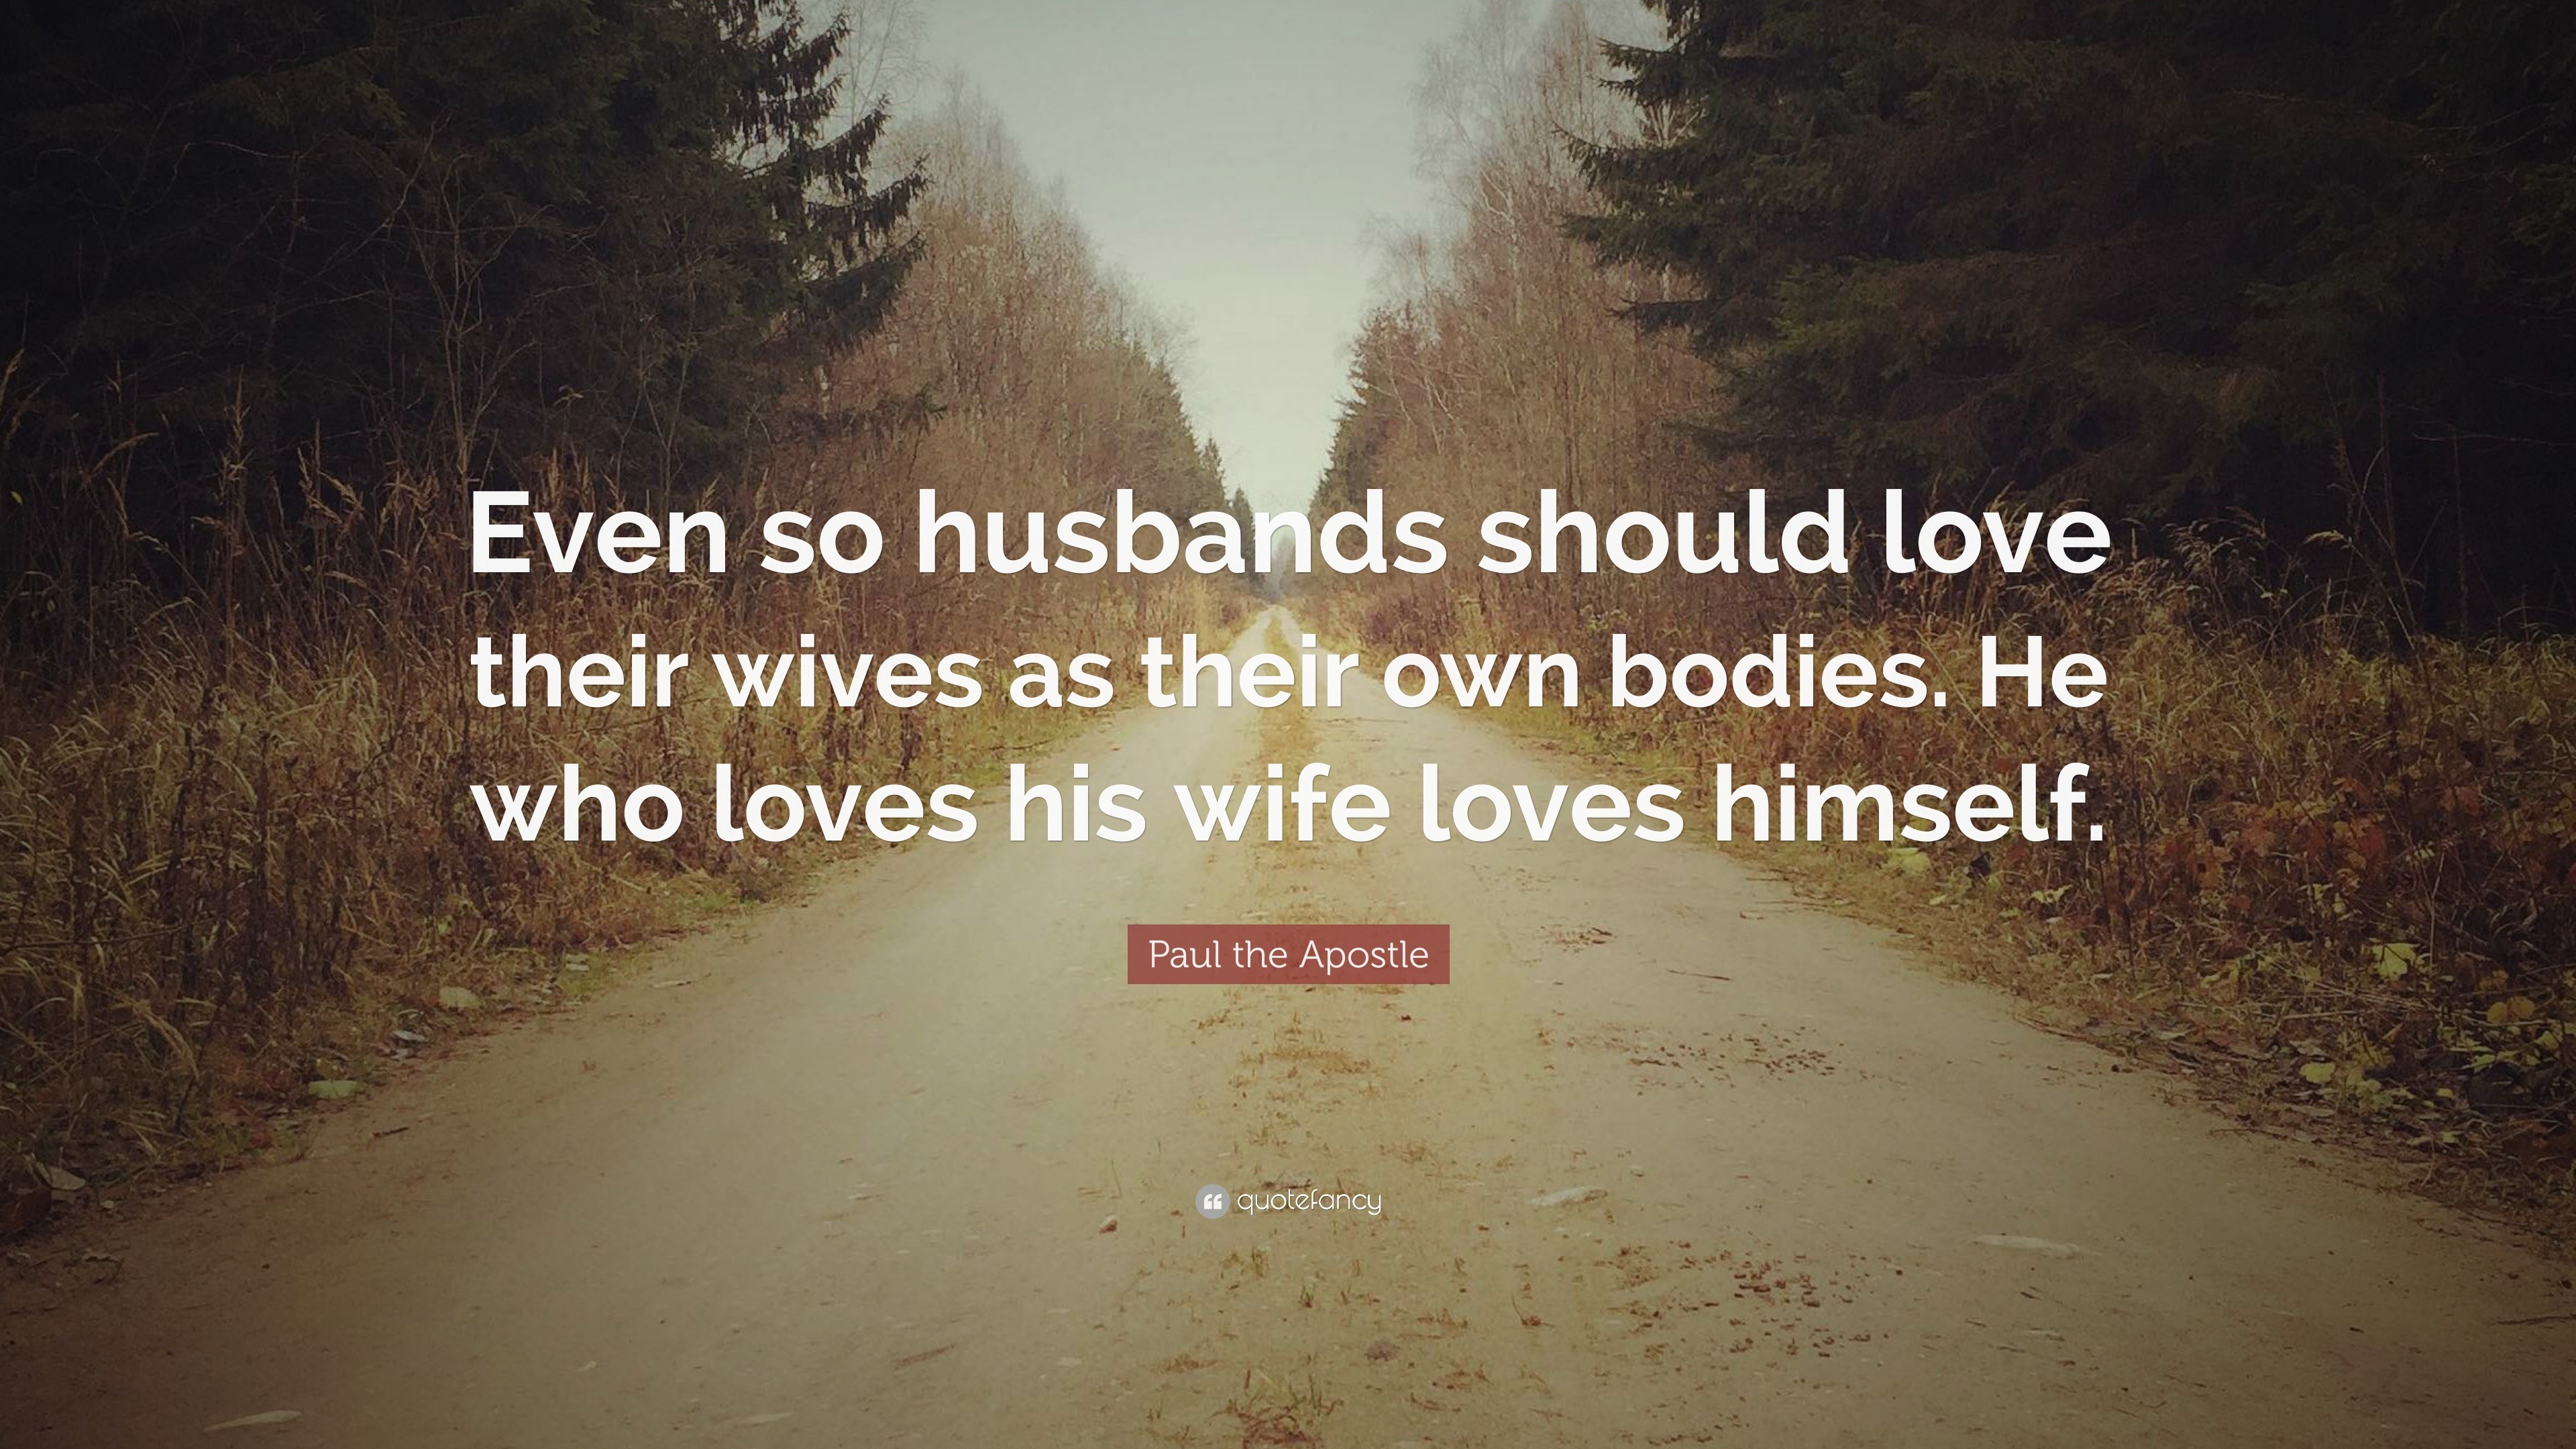 Love their wives why men Top 5